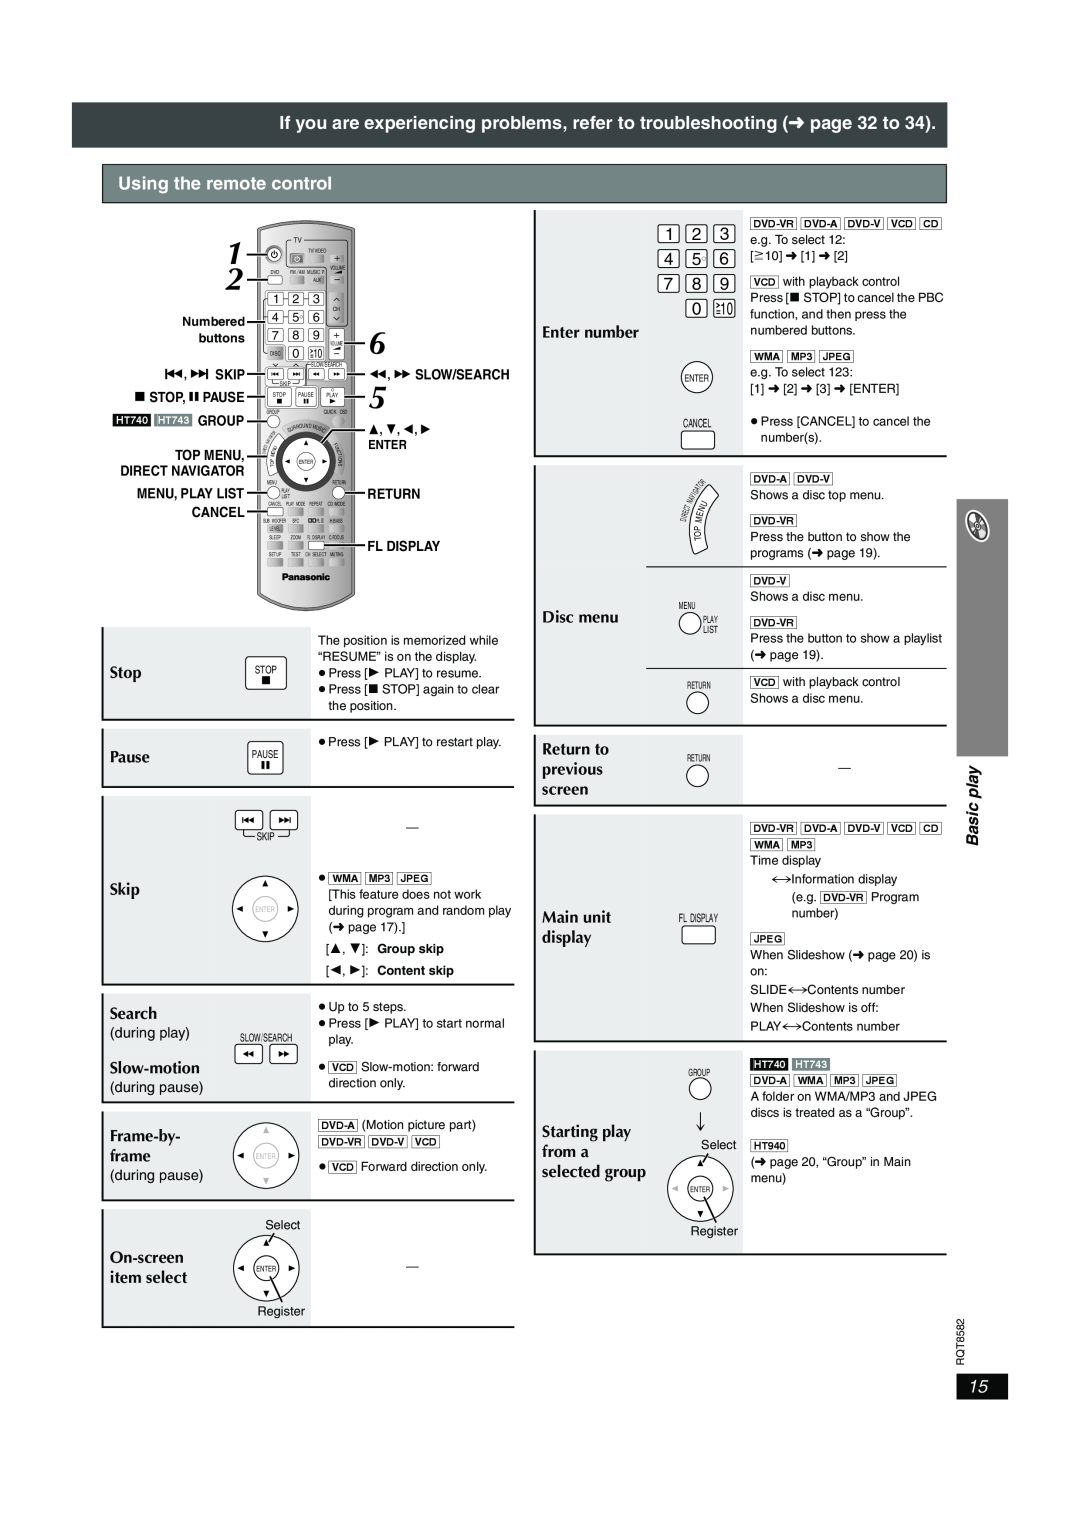 Panasonic SC-HT940, SC-HT740 operating instructions Using the remote control, 2Friday,3 